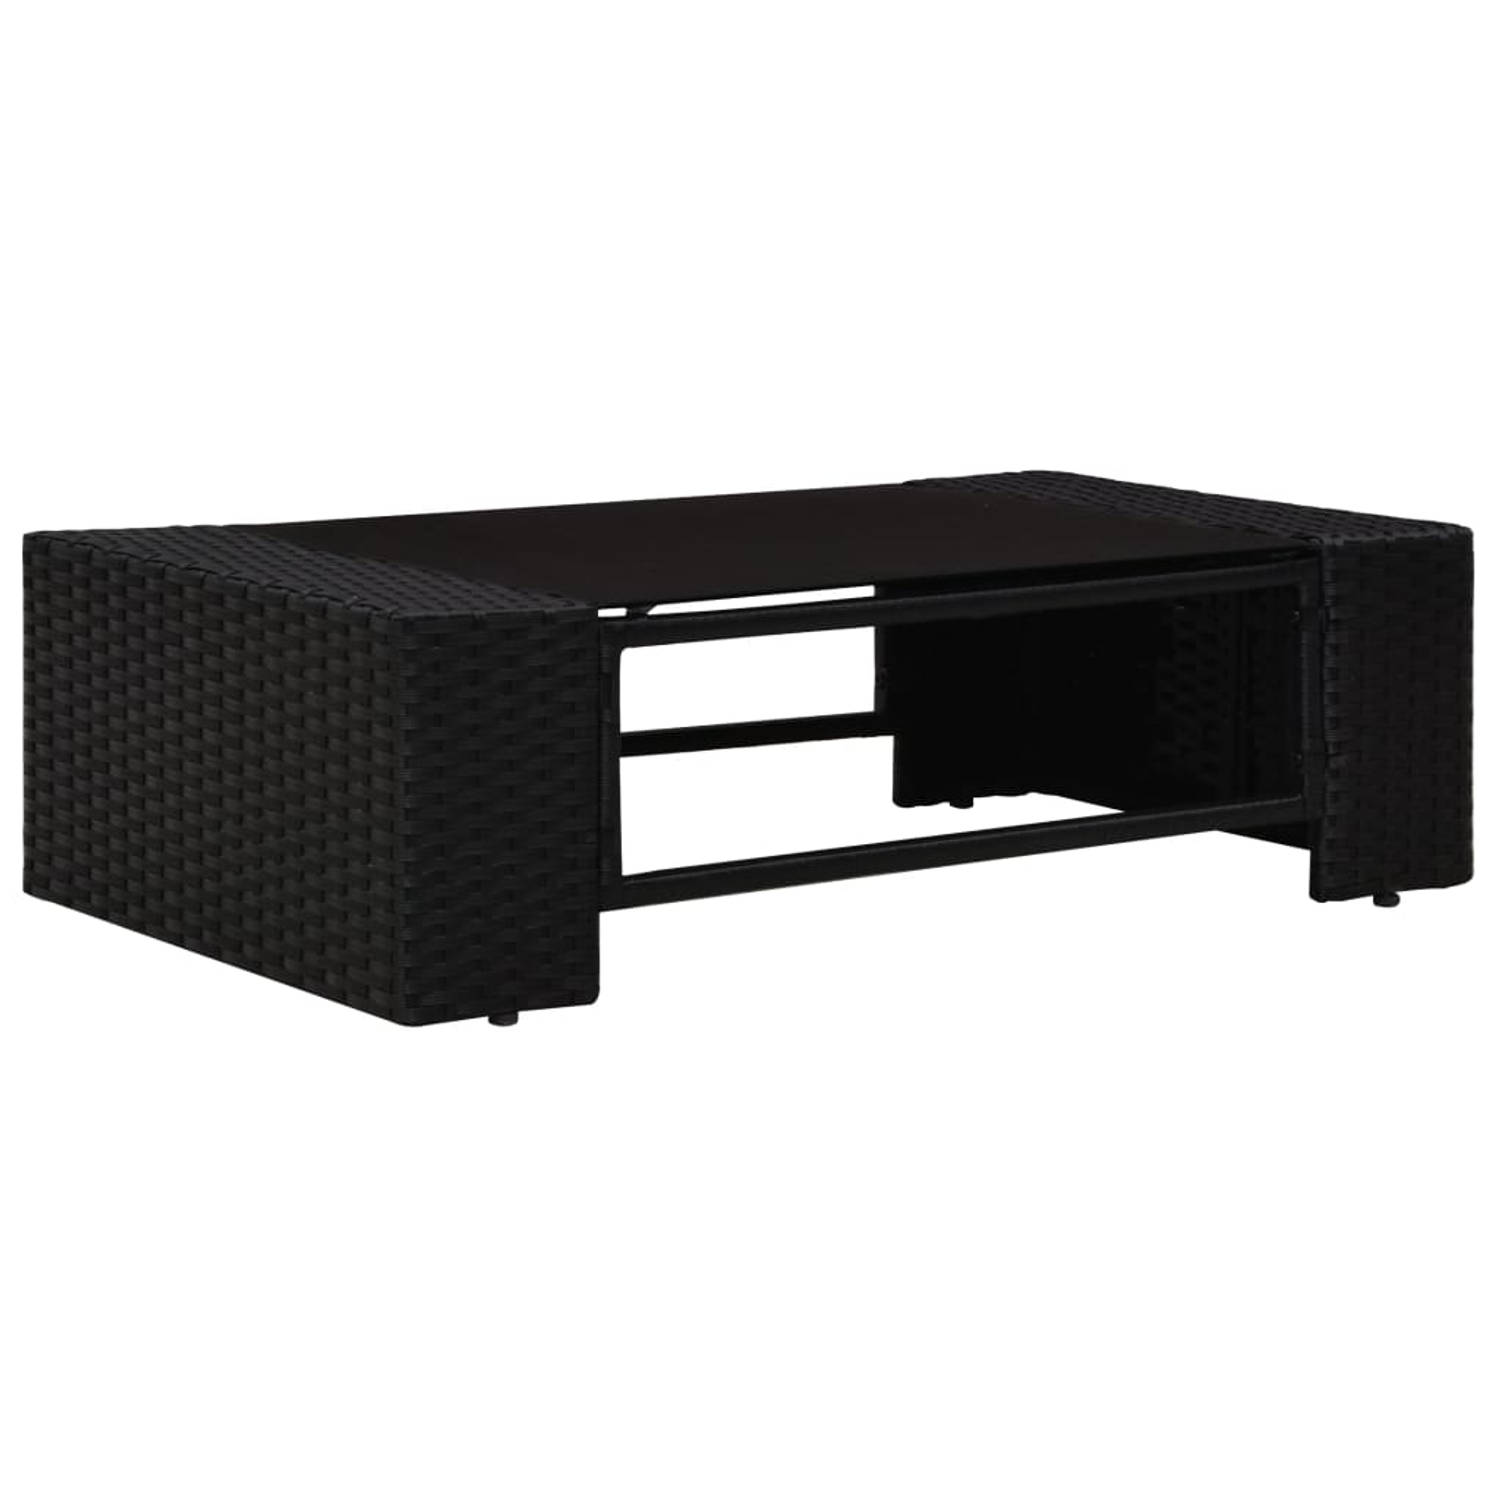 The Living Store Loungeset - Poly Rattan - Zwart - Modulair - Staal Frame - PE-rattan - Inclusief Kussens - Salontafel - 12-delig